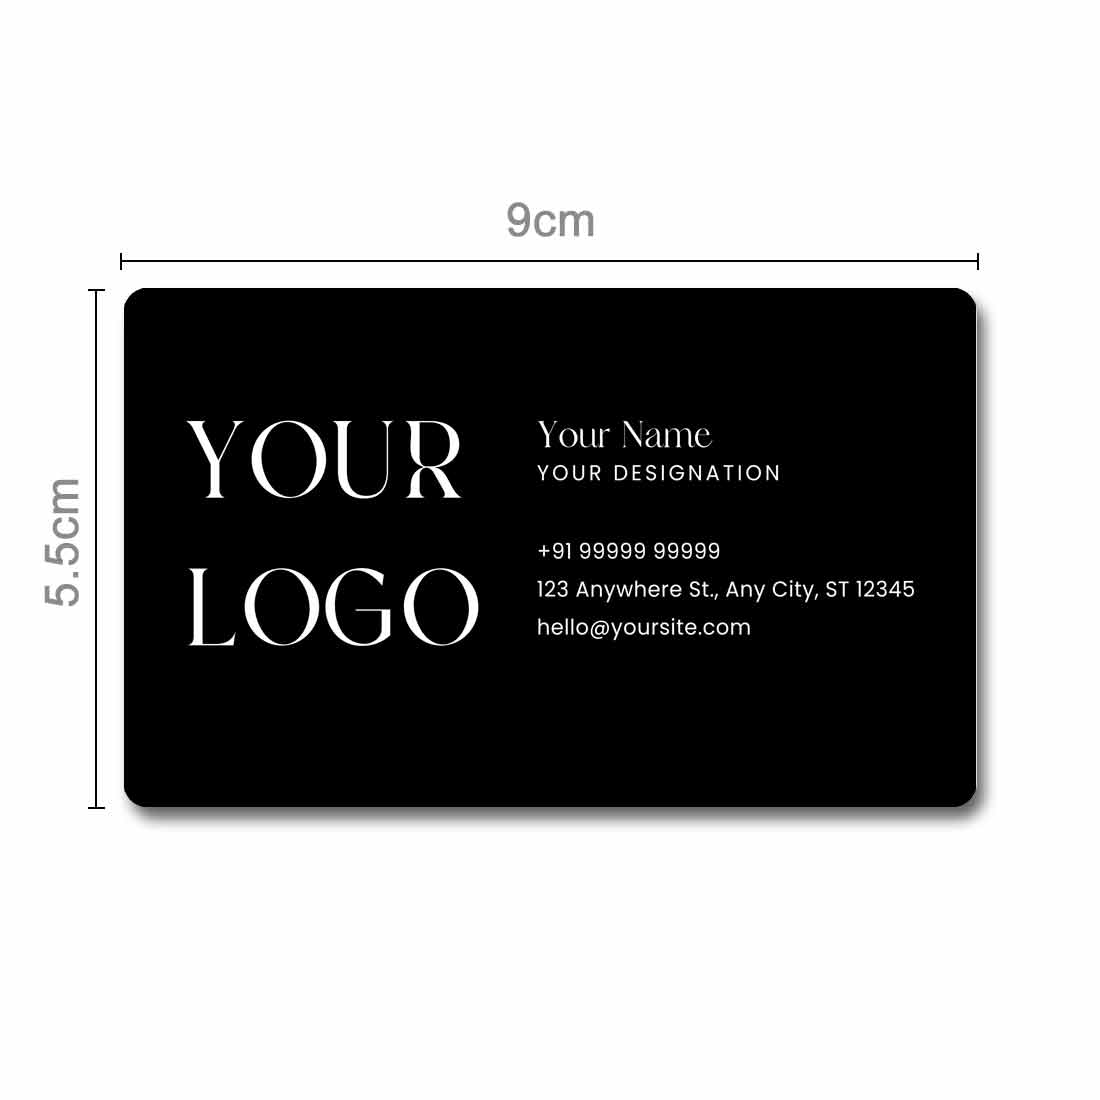 Engraving Custom Made Best NFC Business Cards Metal - Your Logo ( For Android Phones Only)